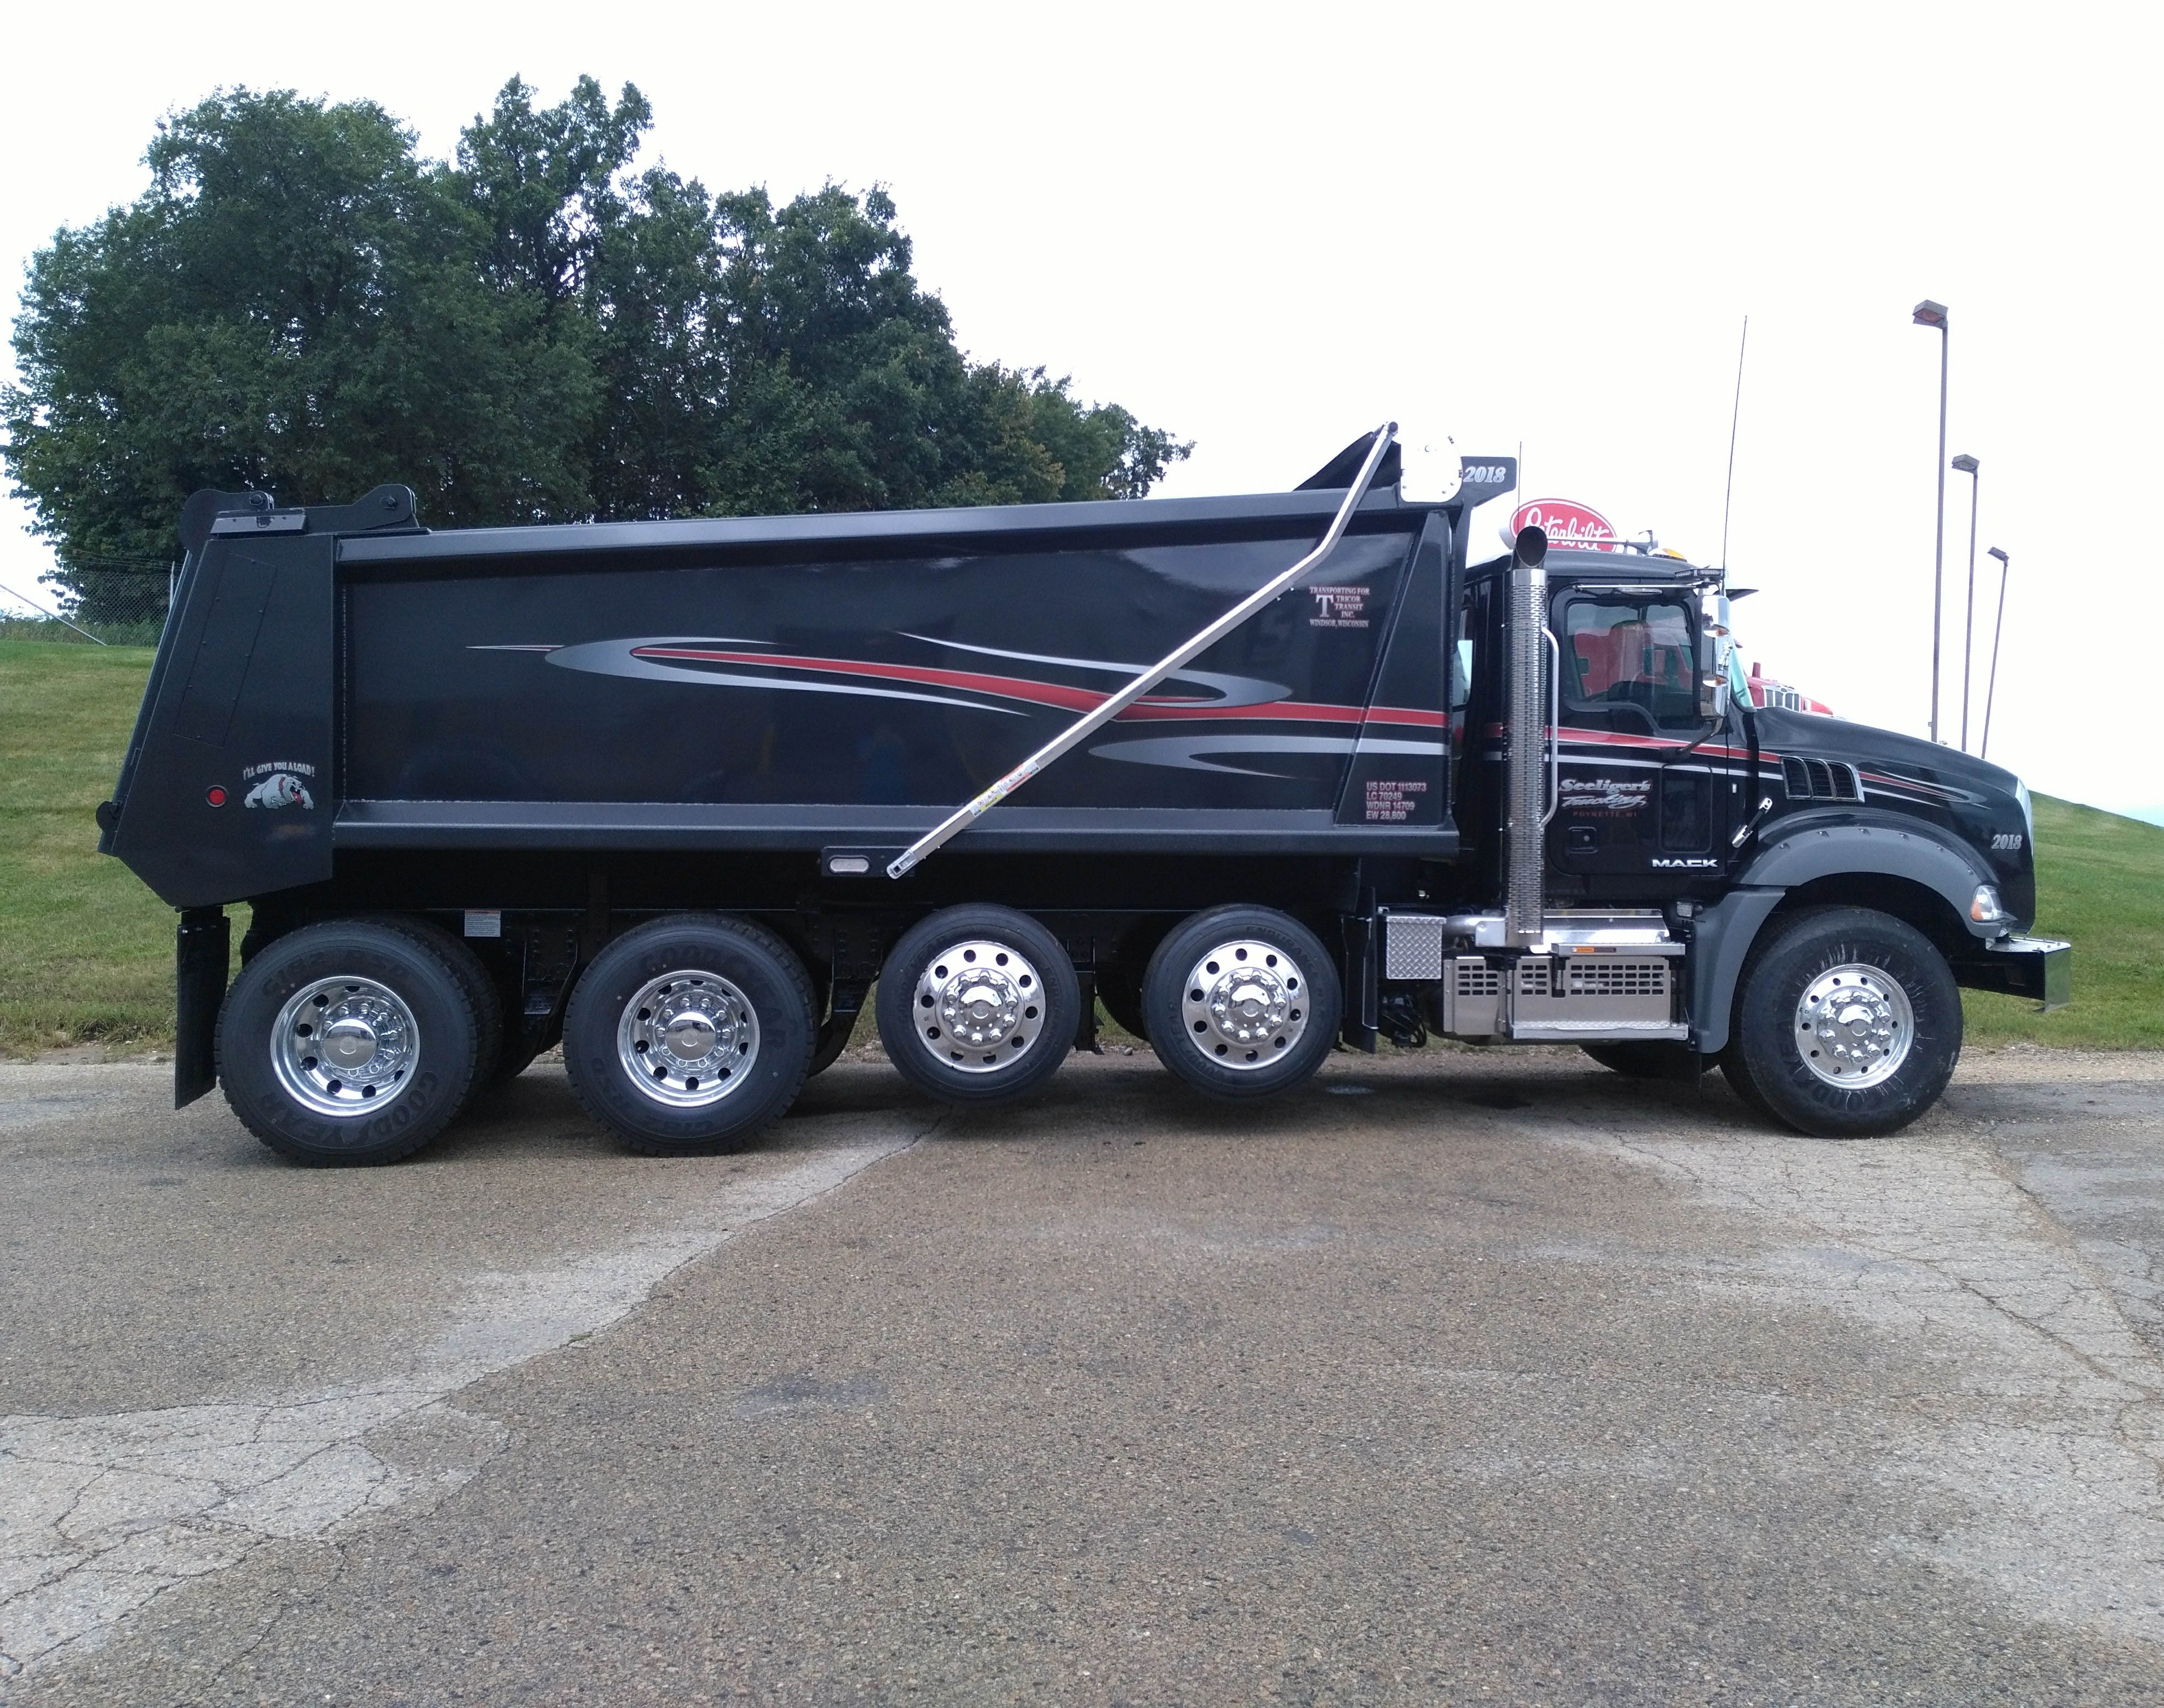 swooping red and silver graphics on dump body truck